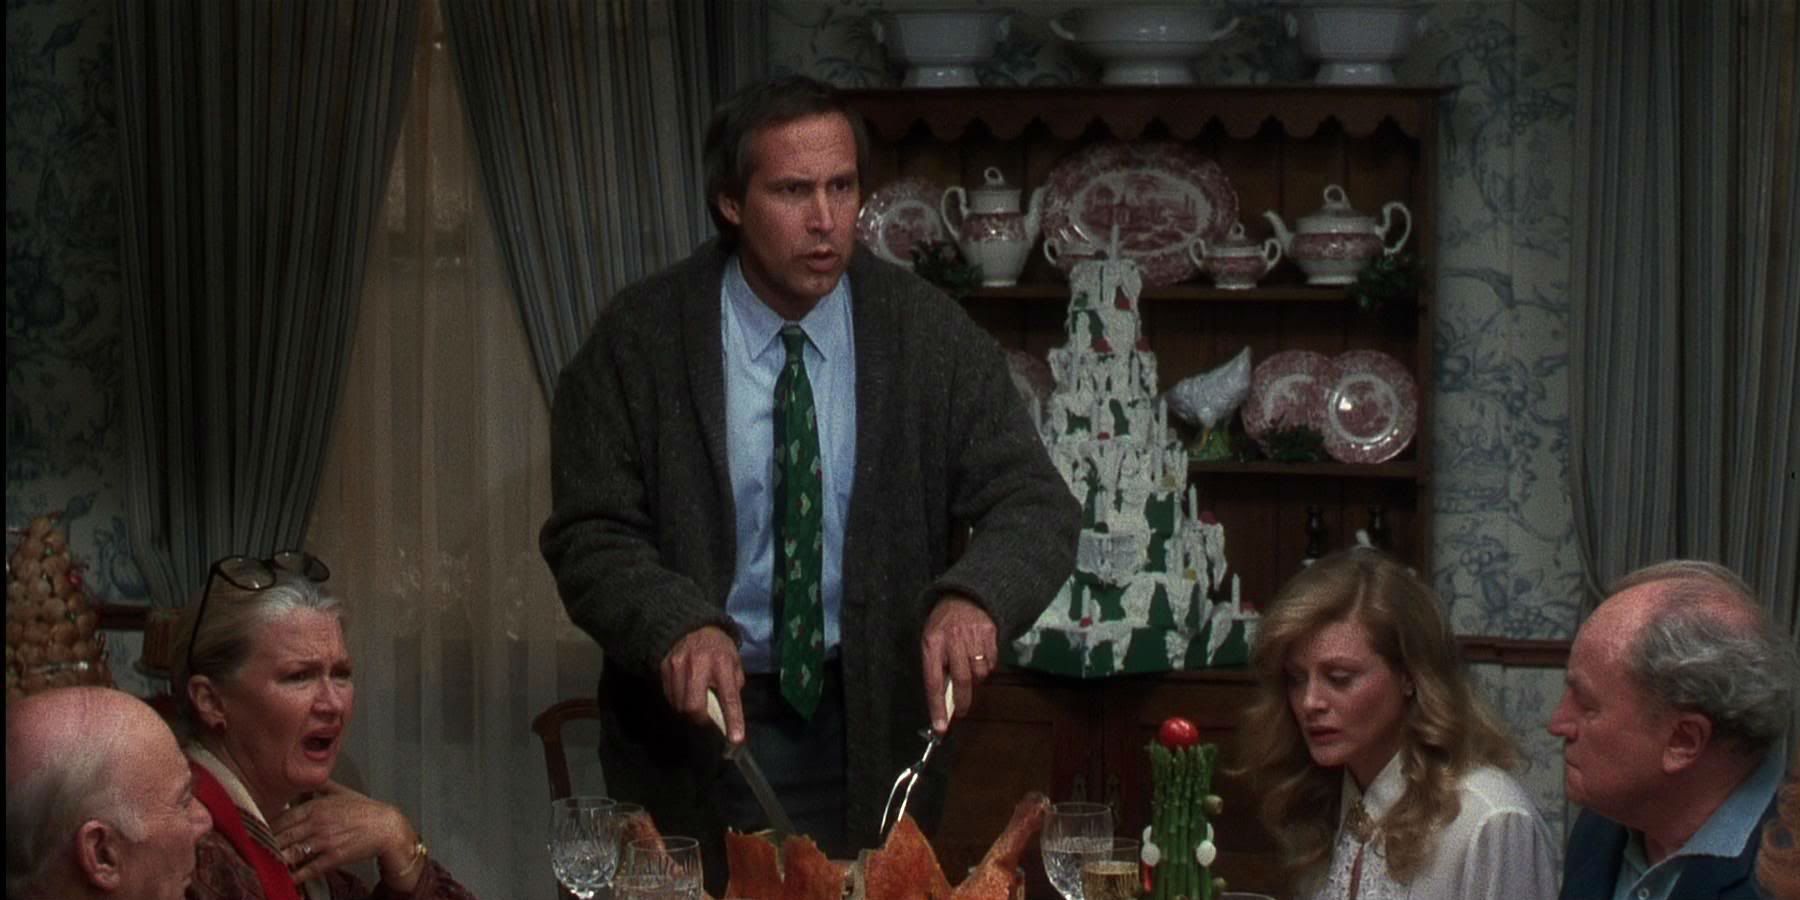 Chevy Chase in Christmas Vacation